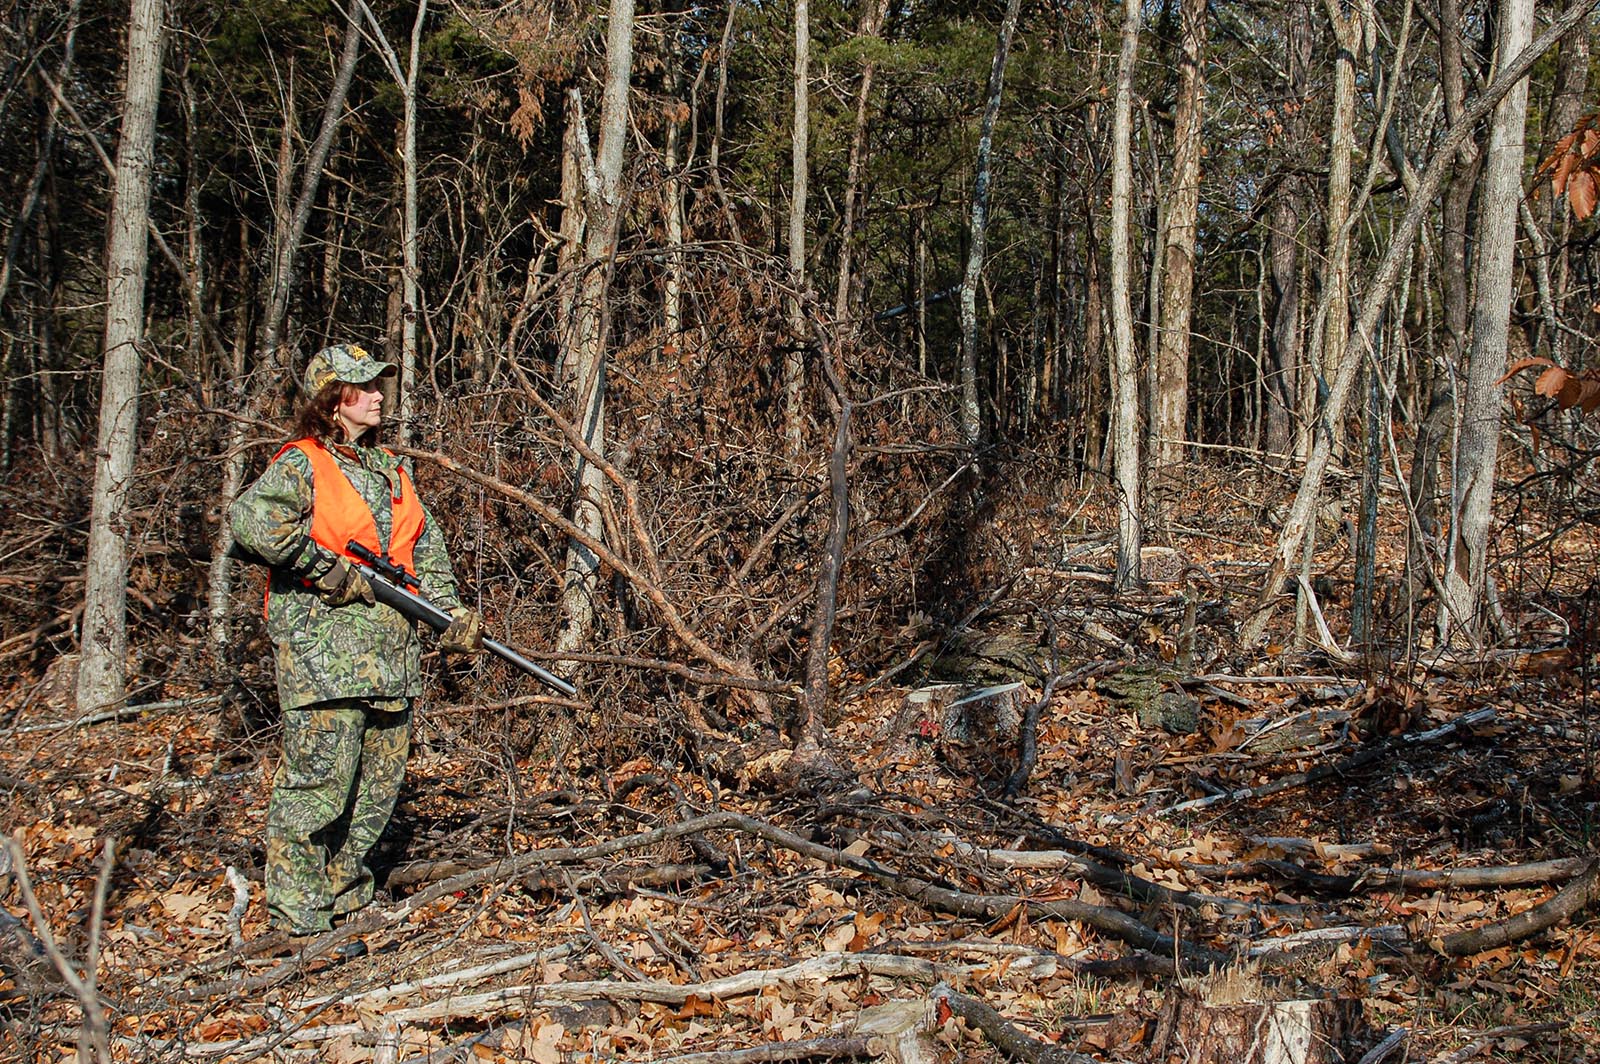 A photo of a hunter holding a gun, dressed in camouflage and blaze orange, standing among cut trees in a forest.